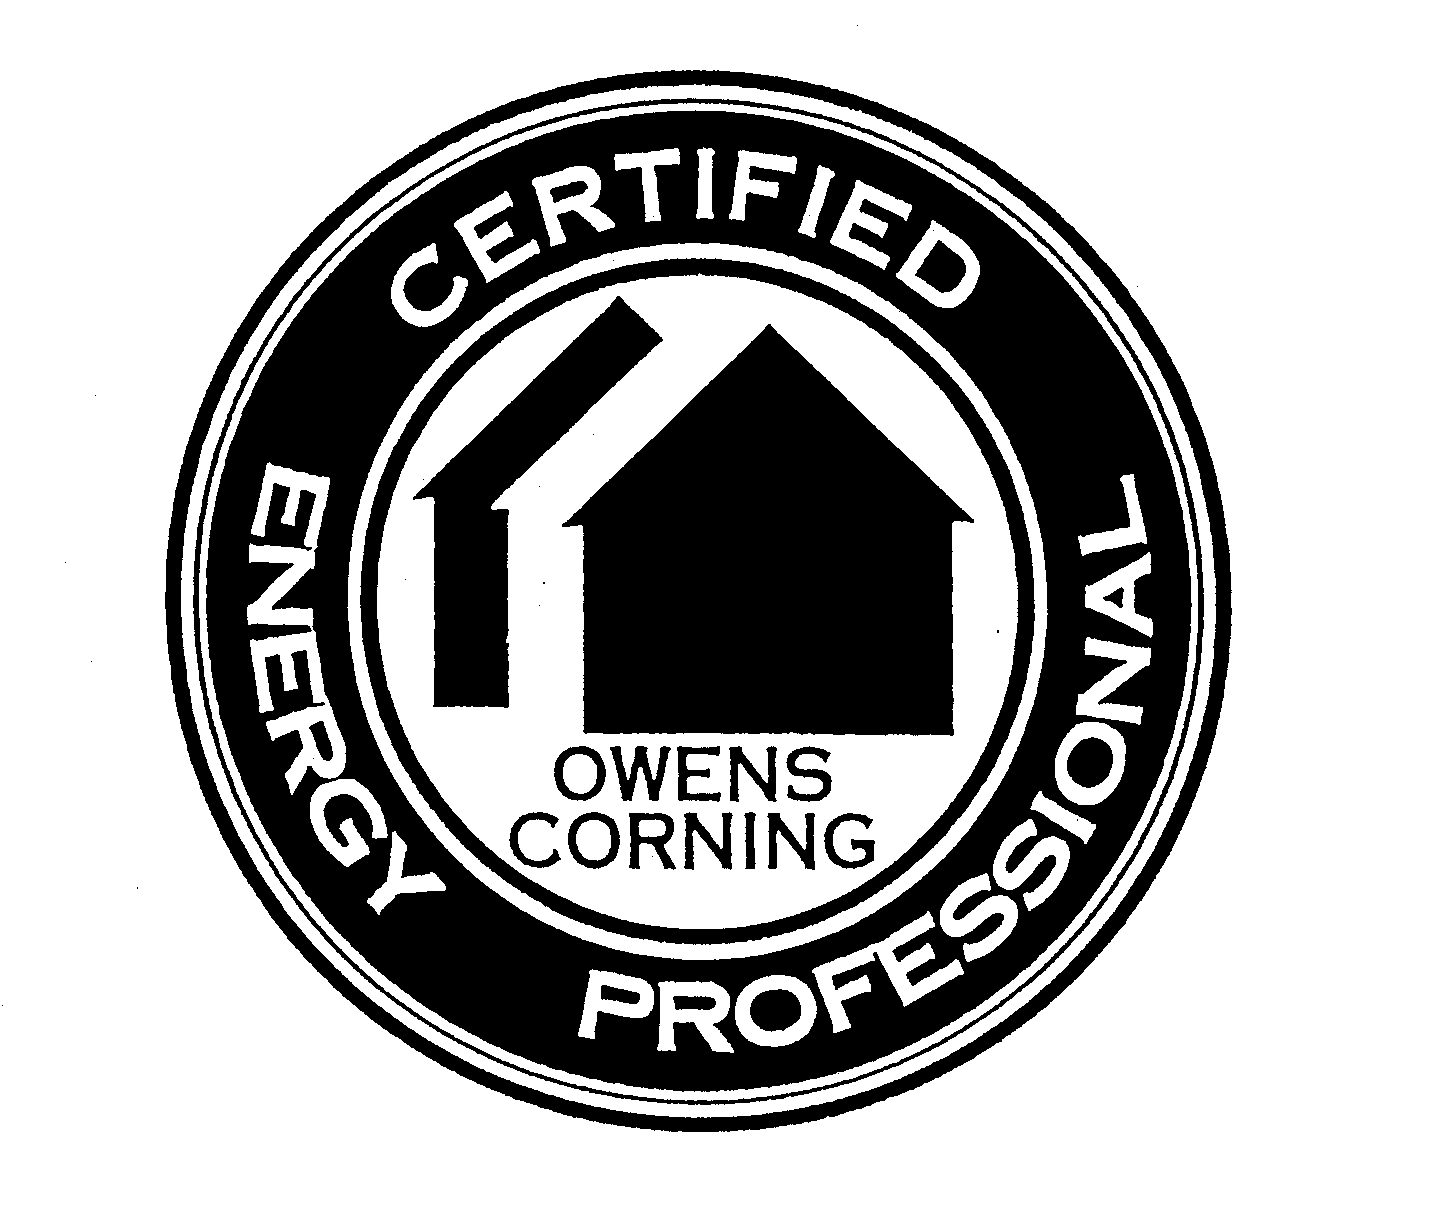  CERTIFIED ENERGY PROFESSIONAL OWENS-CORNING